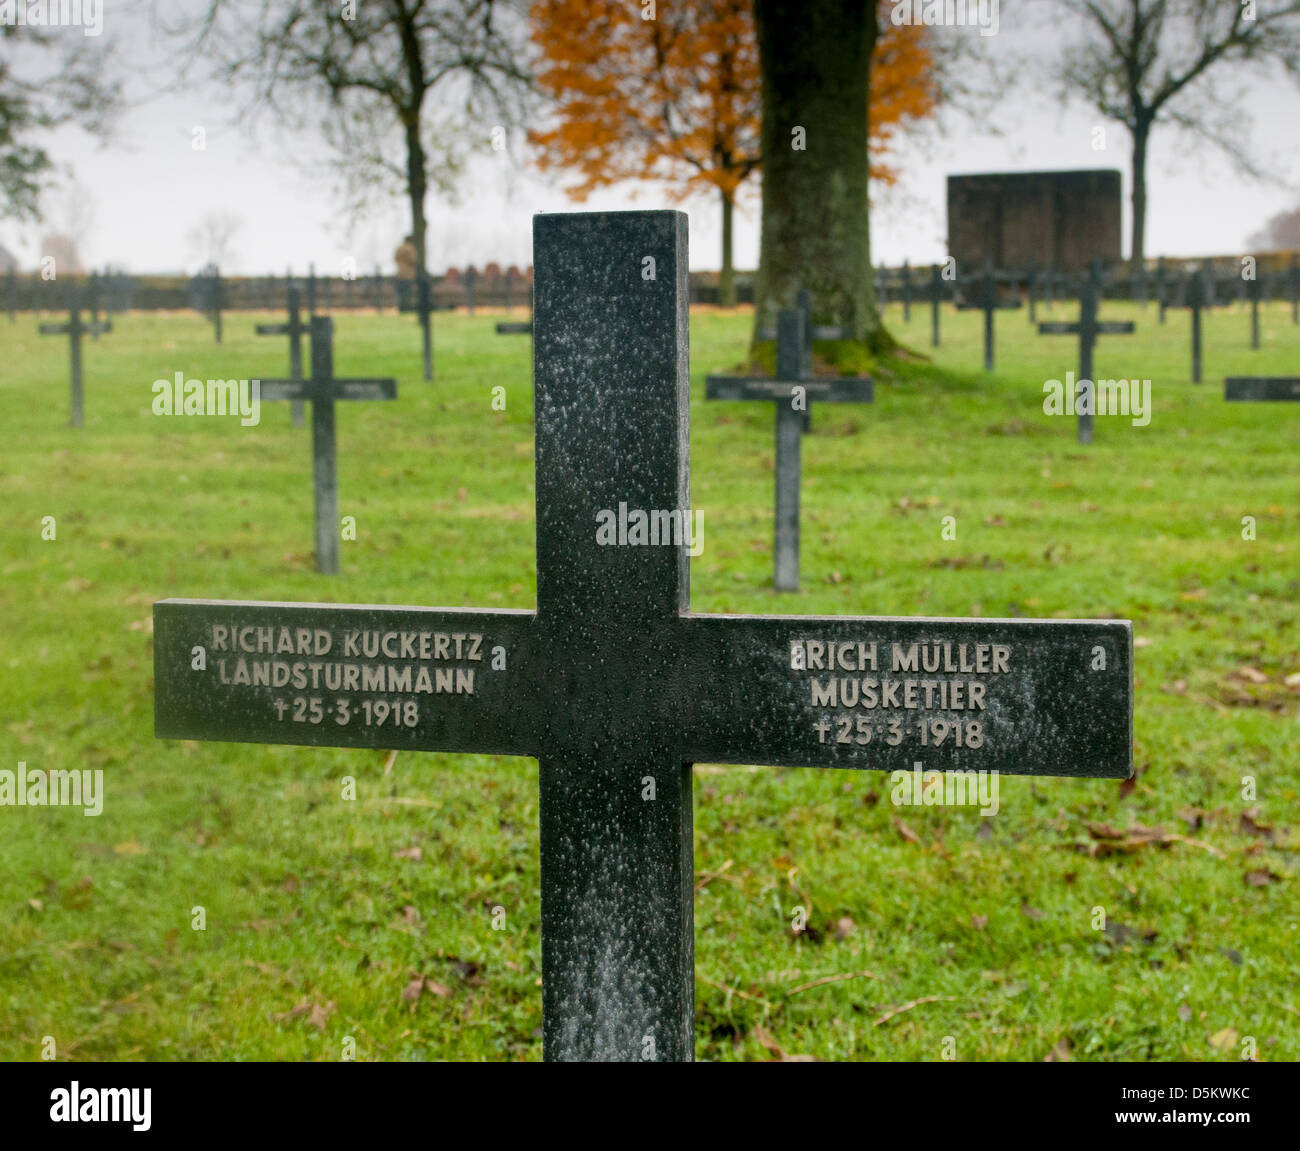 Grave Markers in The German World War One Cemetery, at Fricourt on The Somme Battlefield, France Stock Photo